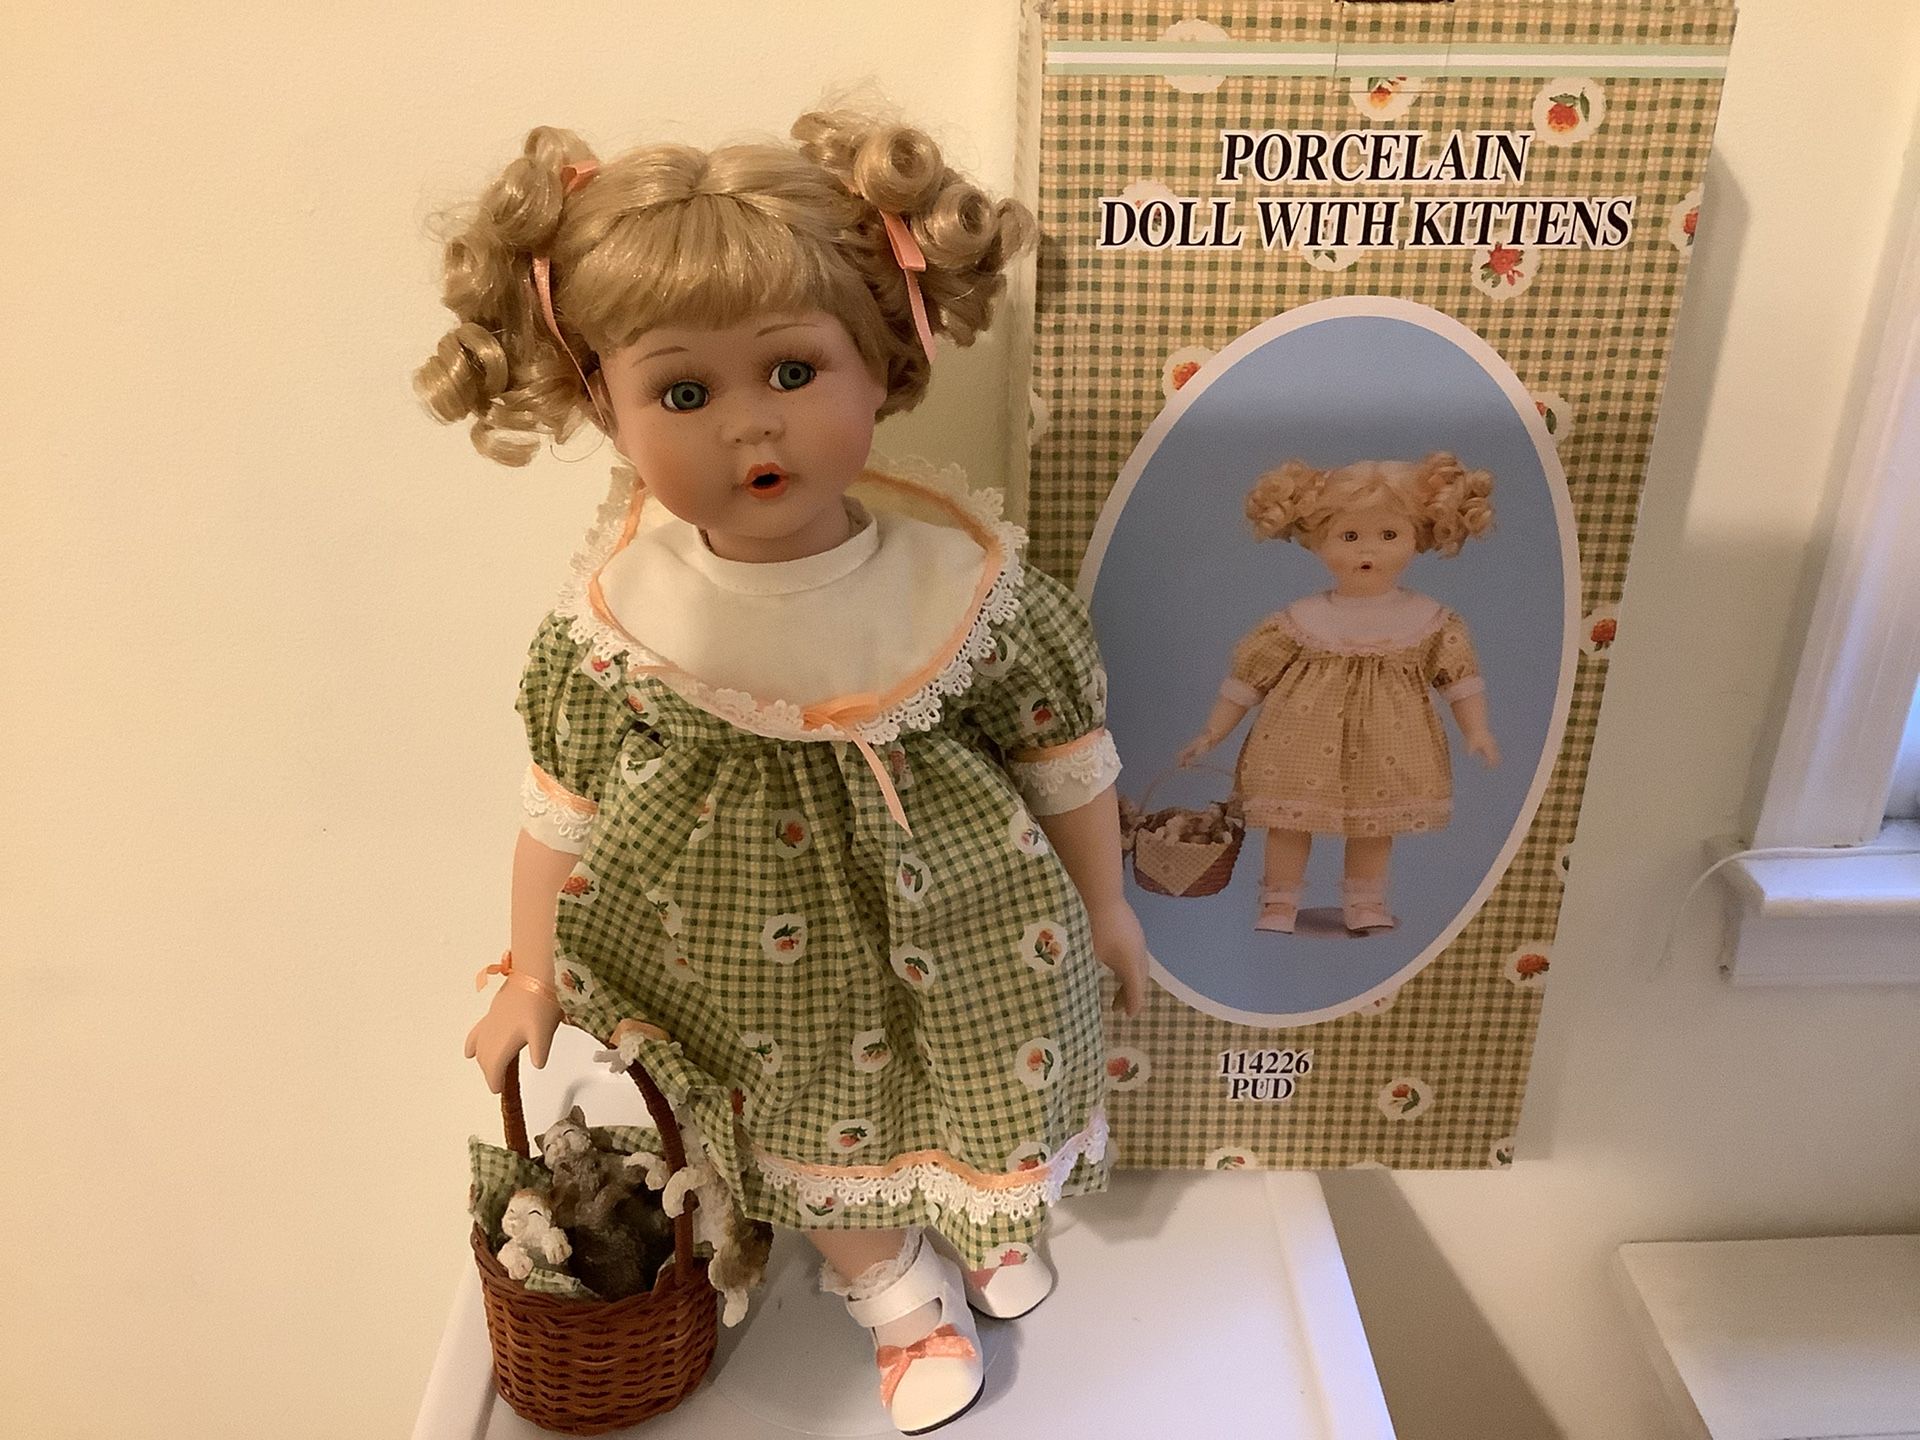 Vintage Porcelain Doll With Basket Of Kittens 15” Tall  New In Box 